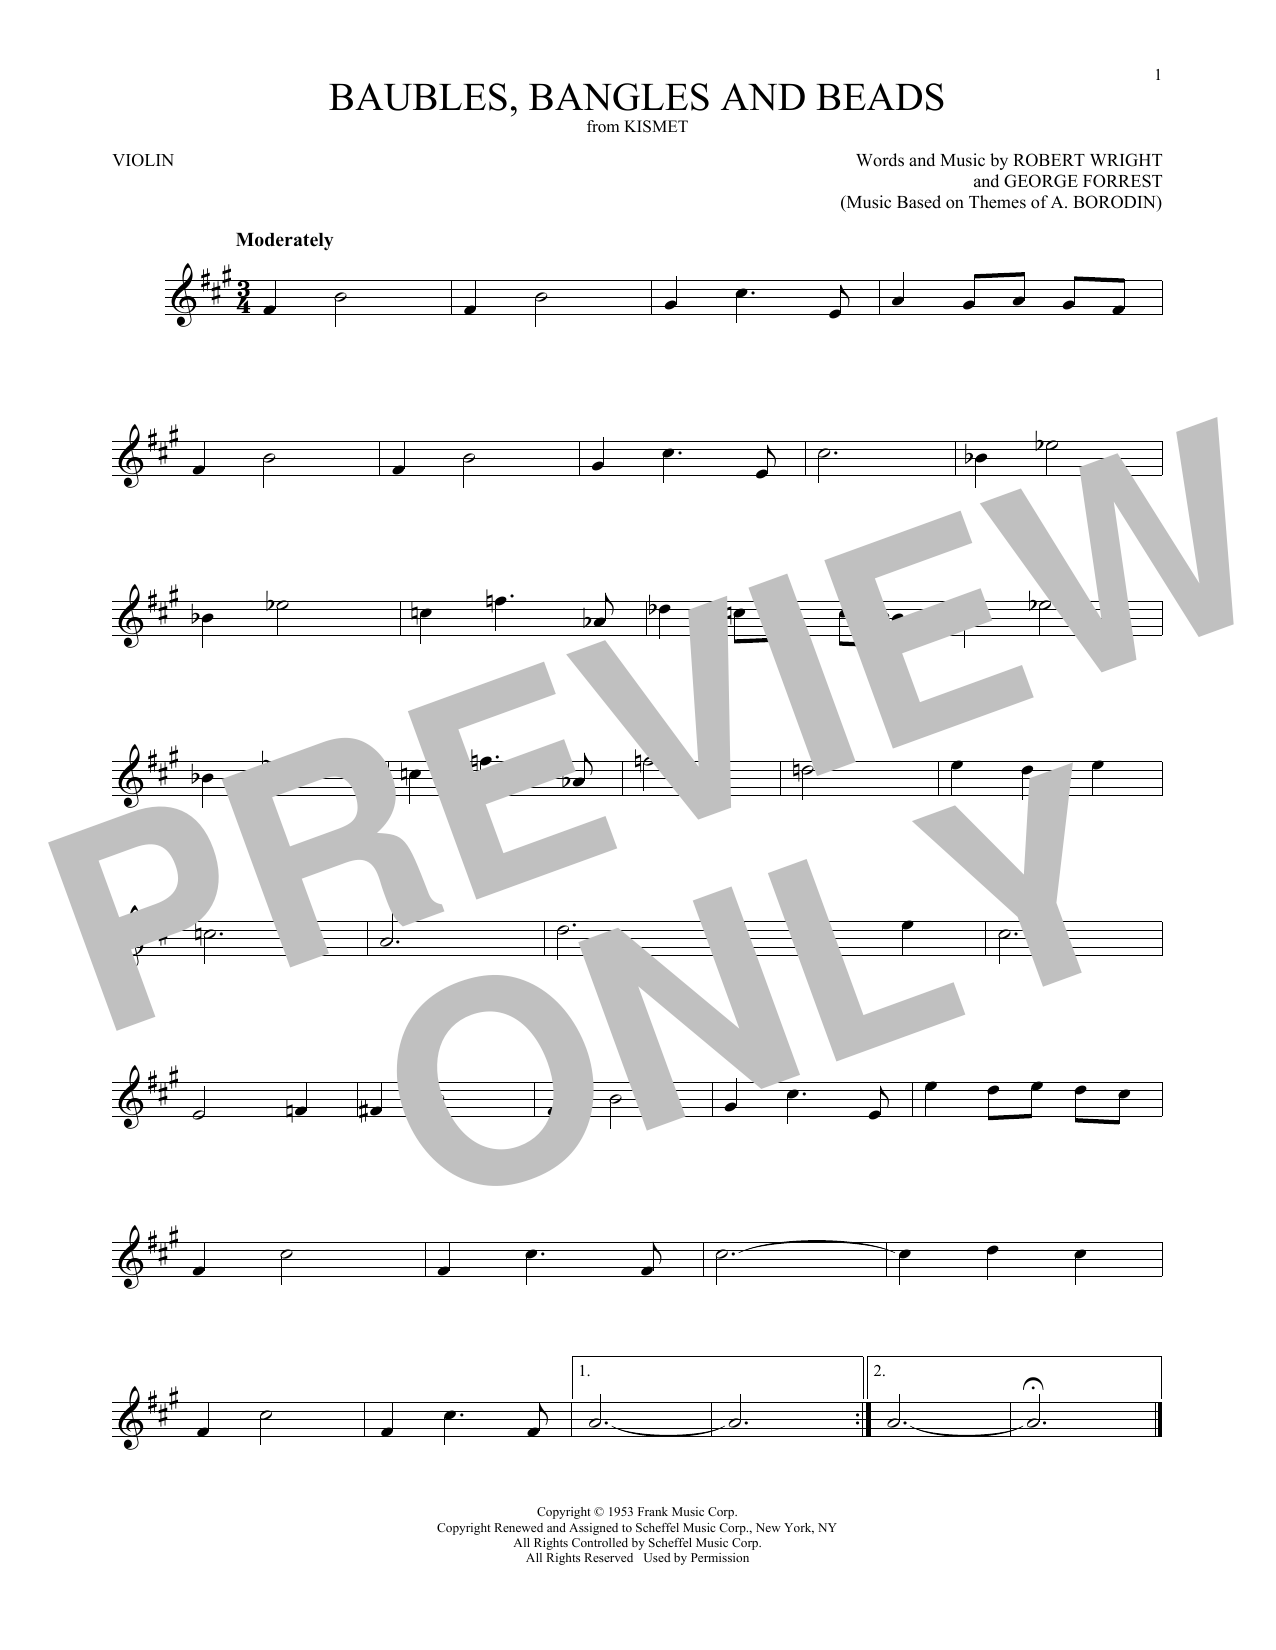 Download George Forrest Baubles, Bangles And Beads Sheet Music